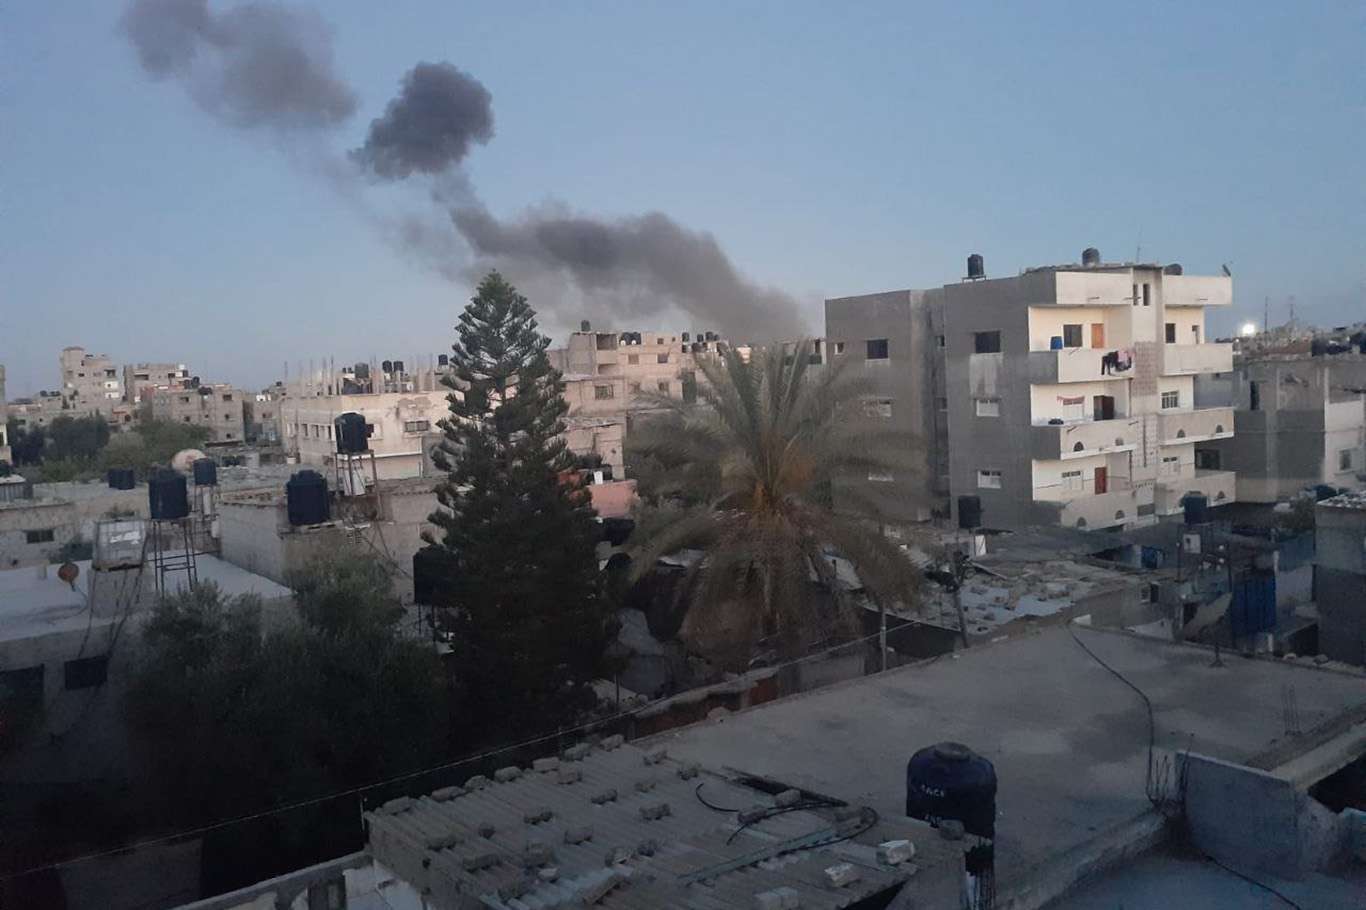 At least 4 civilians killed, 10 others injured in zionist regime airstrikes on Gaza